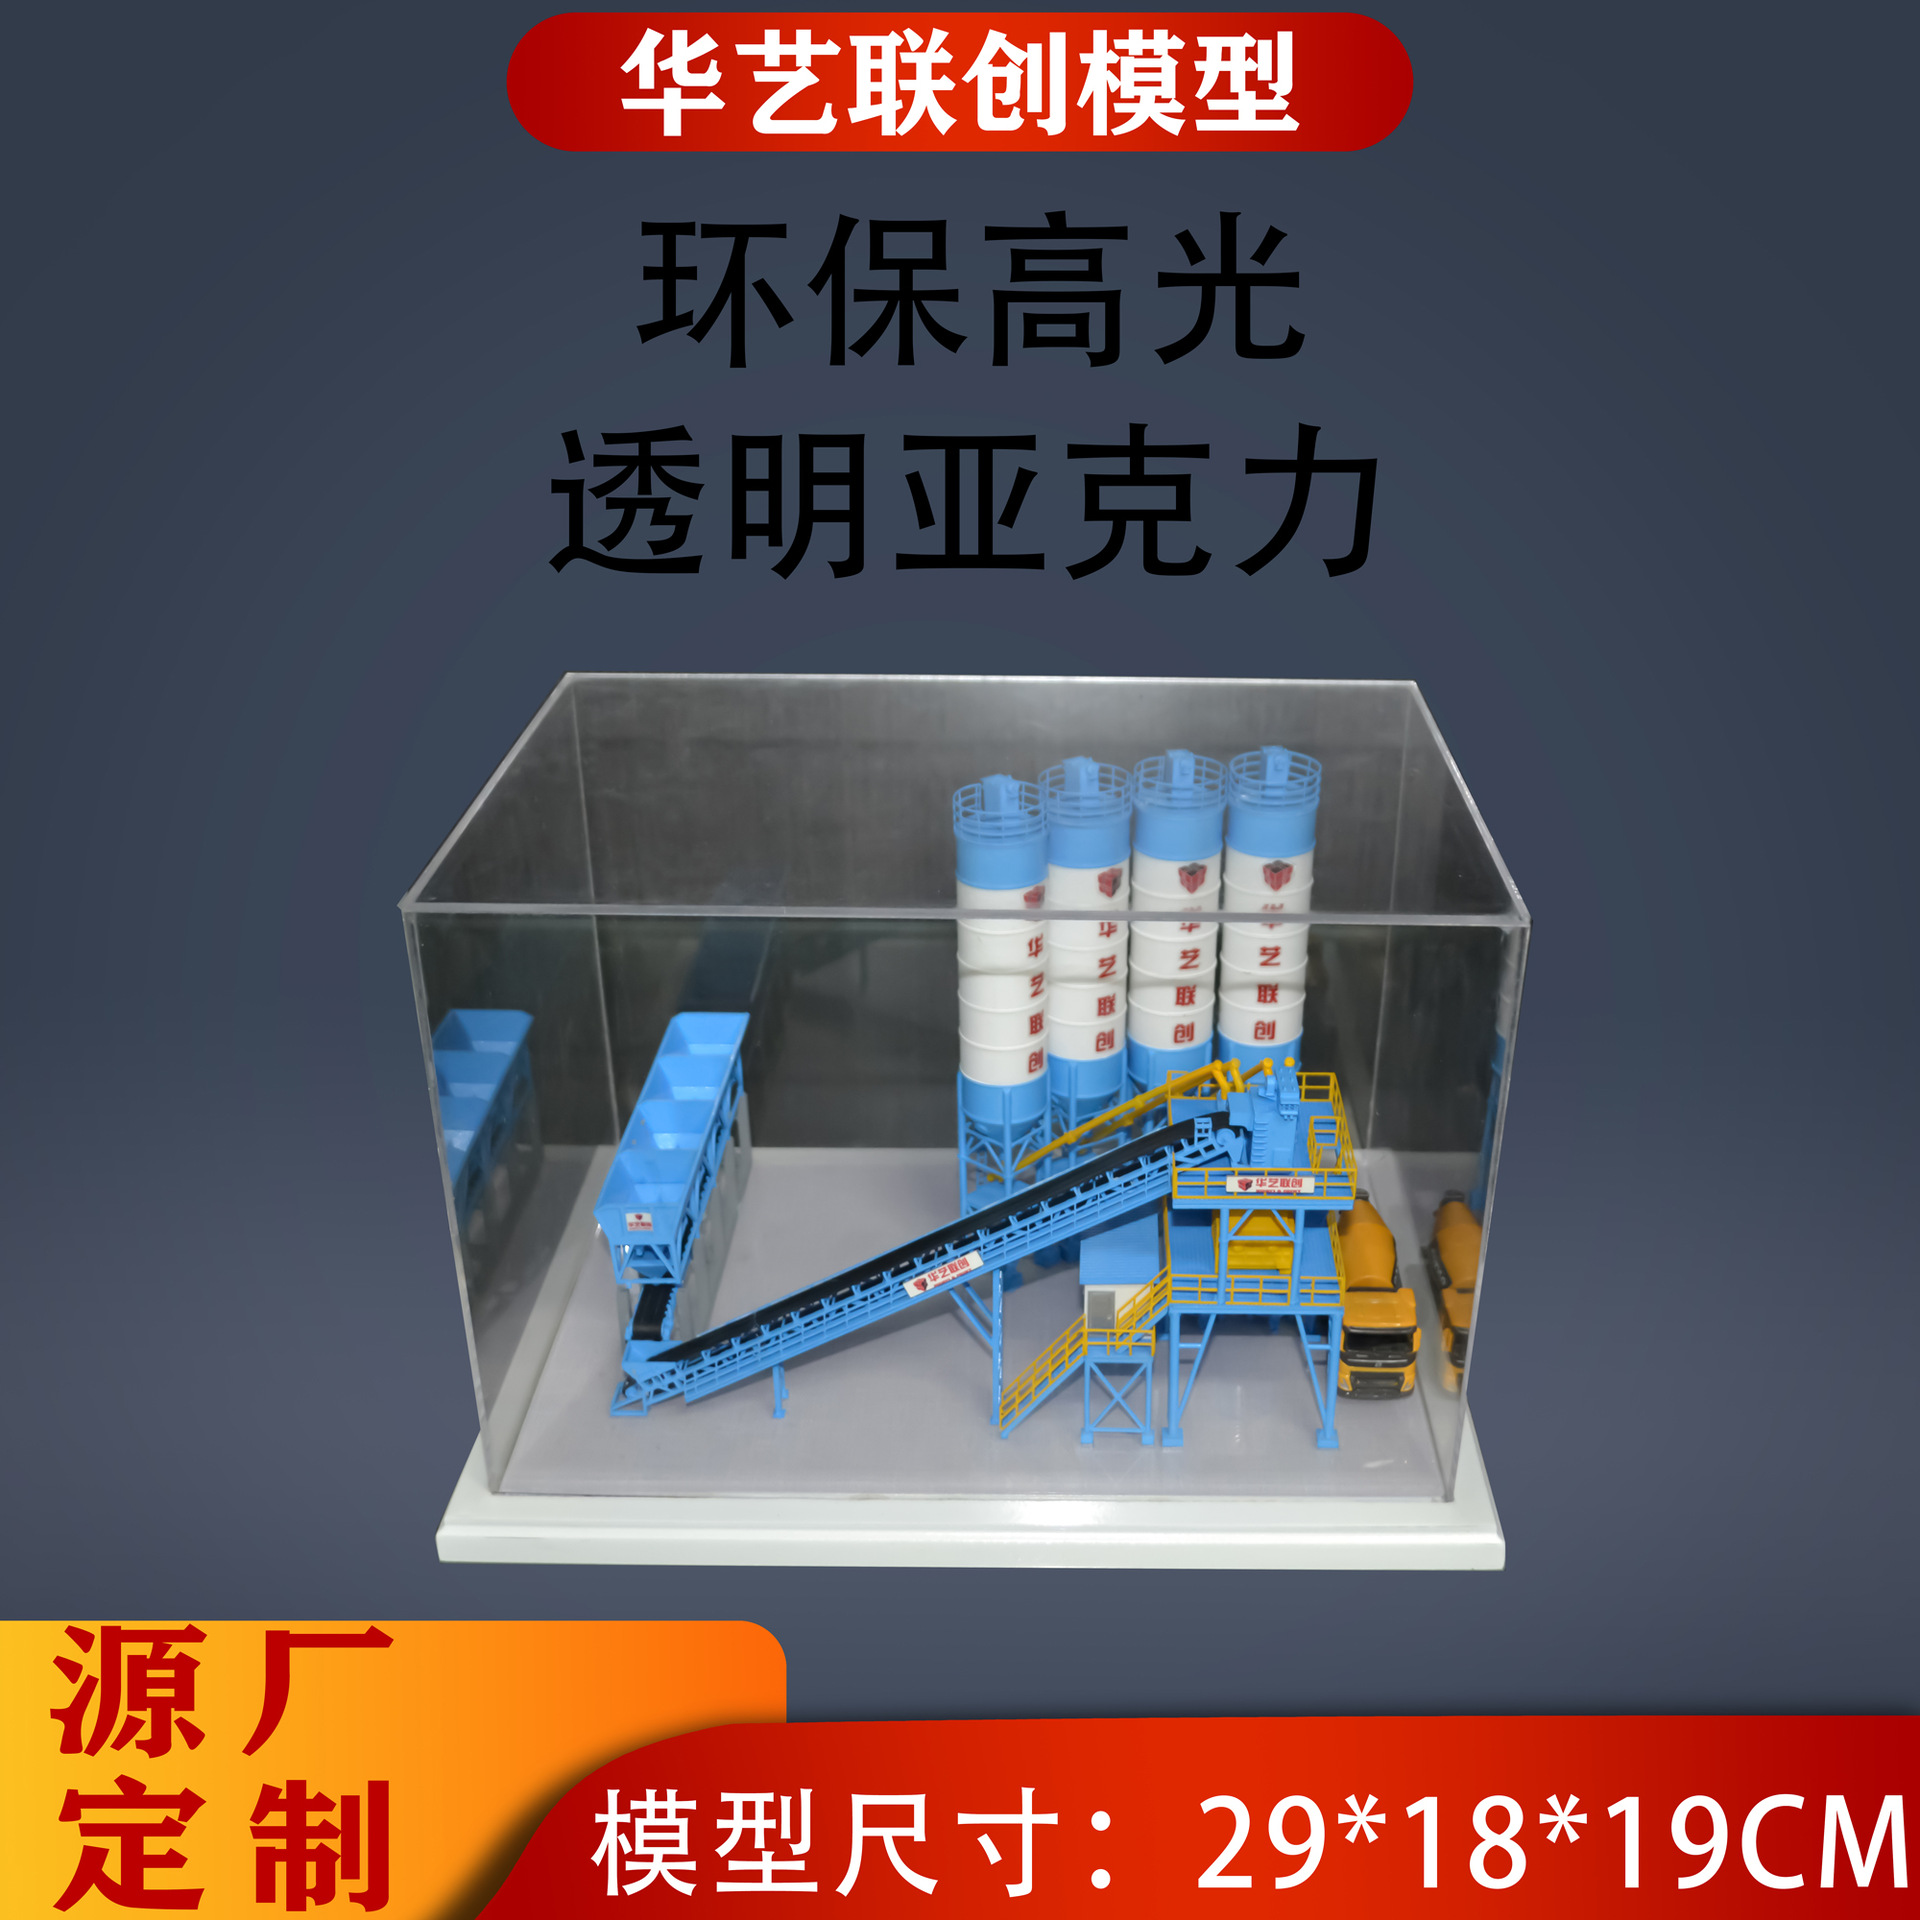 3D Printing Miniature Machinery Industrial Production Line Model Industrial Equipment Hand Castanets Model Concrete Mixing Station Model